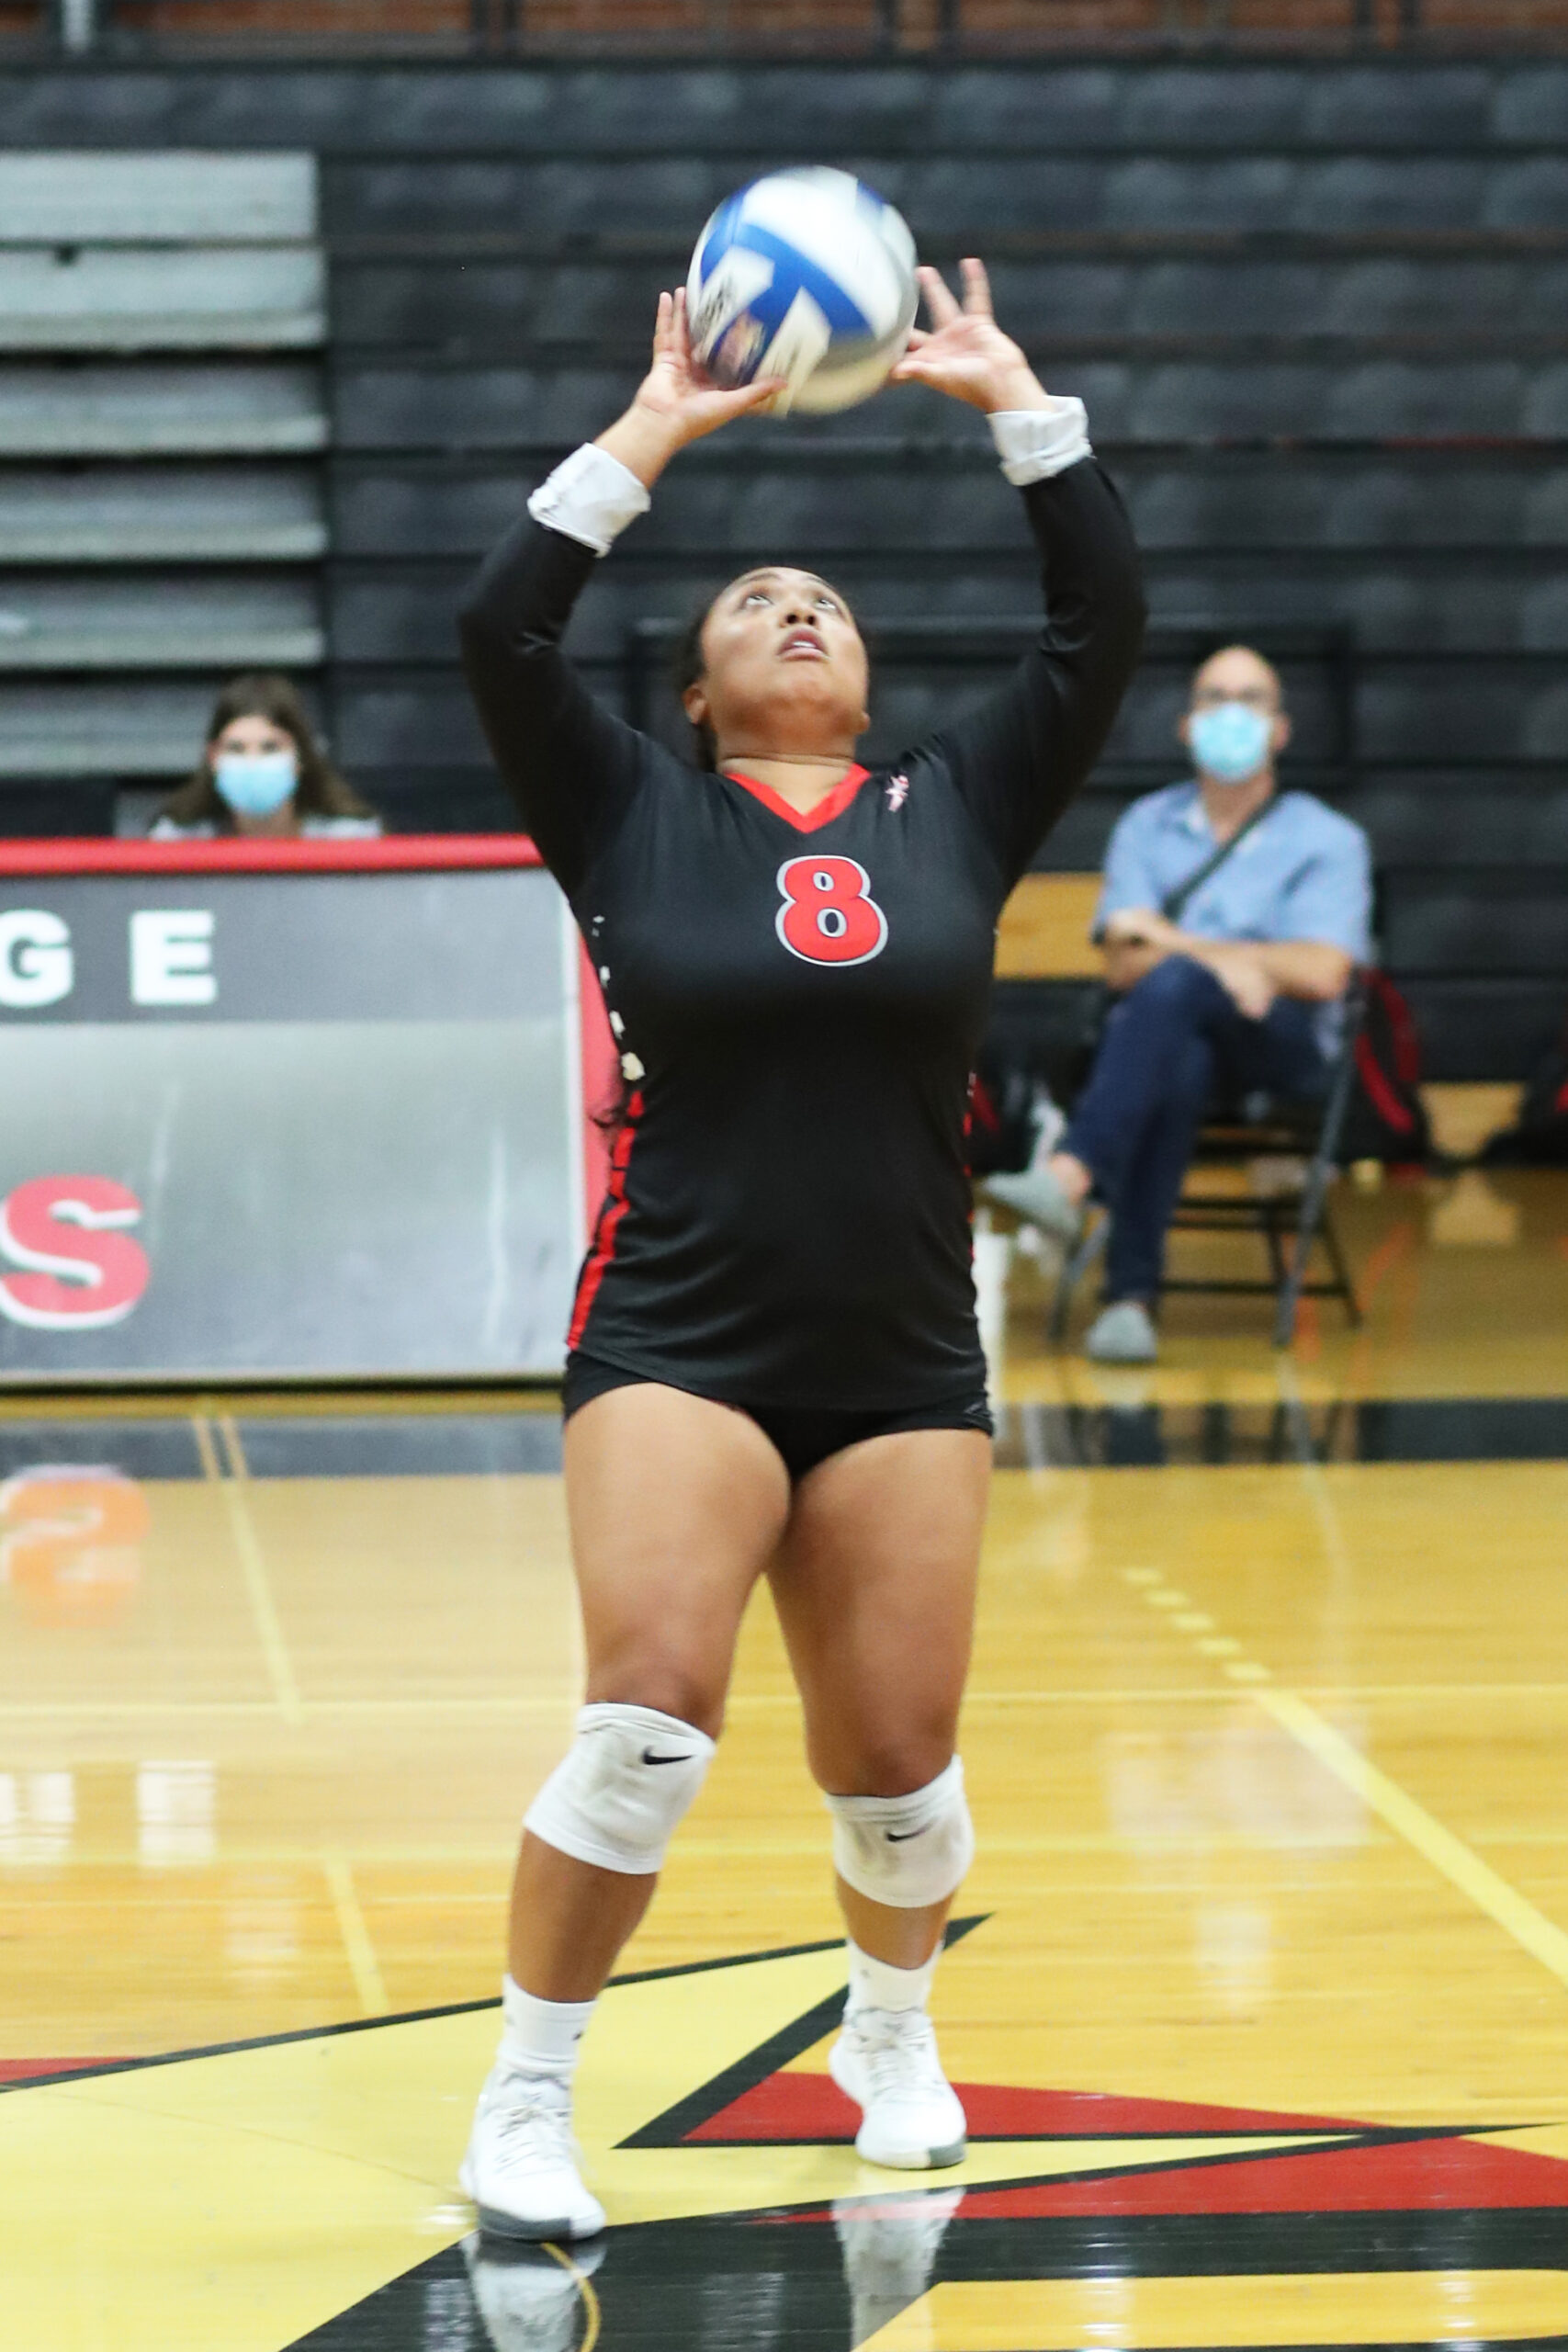 A female Palomar volleyball player (8) sets a volleyball with both hands. She wears a black jersey, black shorts and white knee pads.